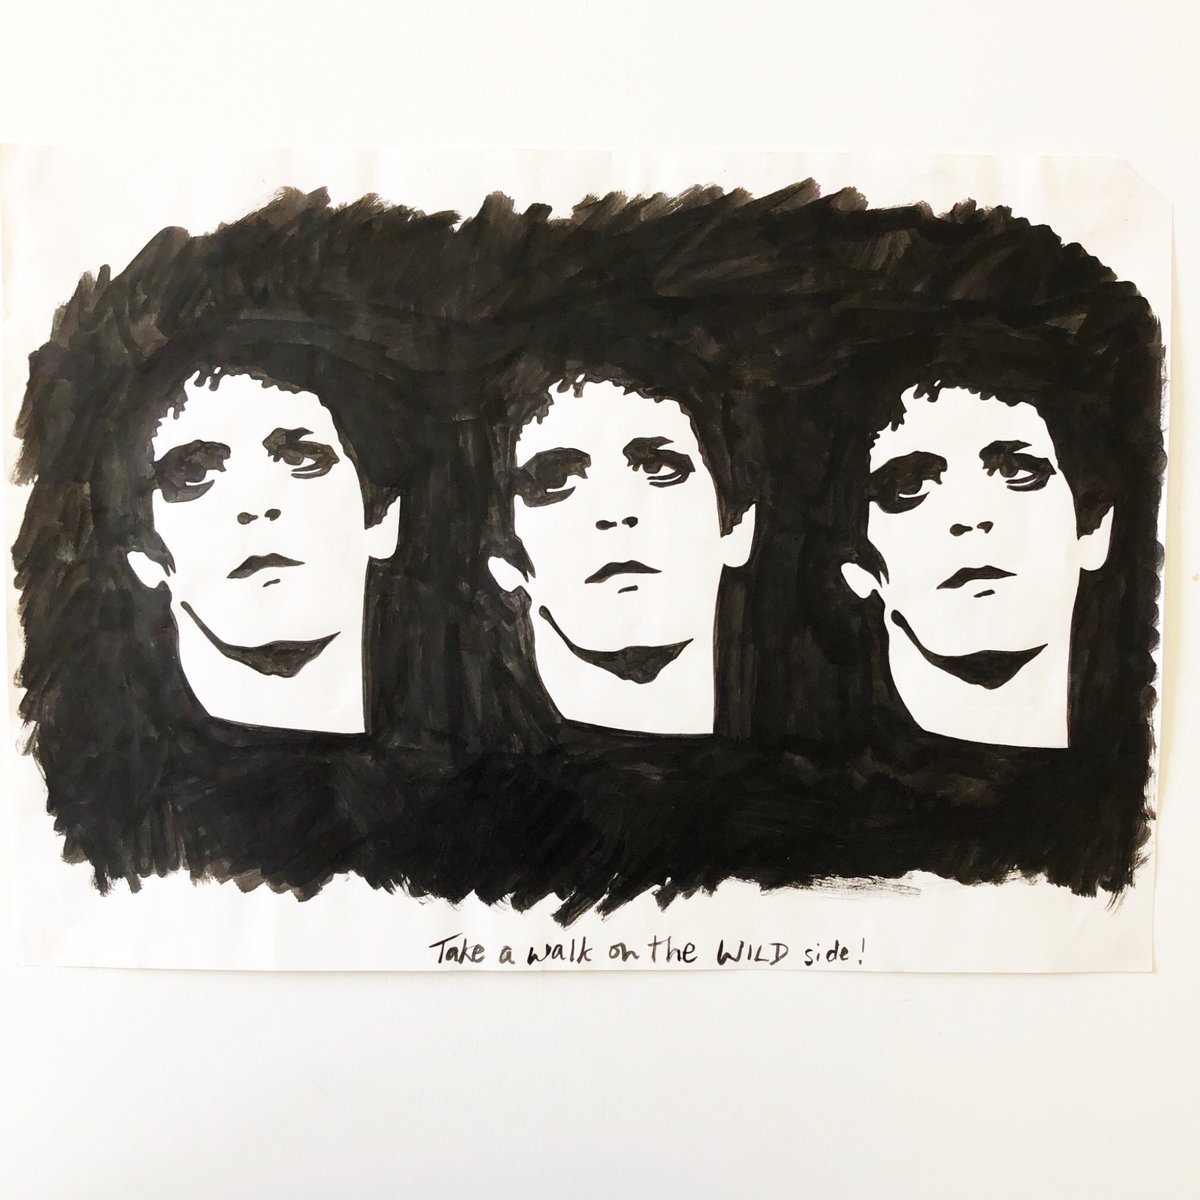 Found some of the Indian Ink paintings I did from when I was 16! Was a Lou Reed fan! #loureed #janefosterdesigns #teenagedrawings